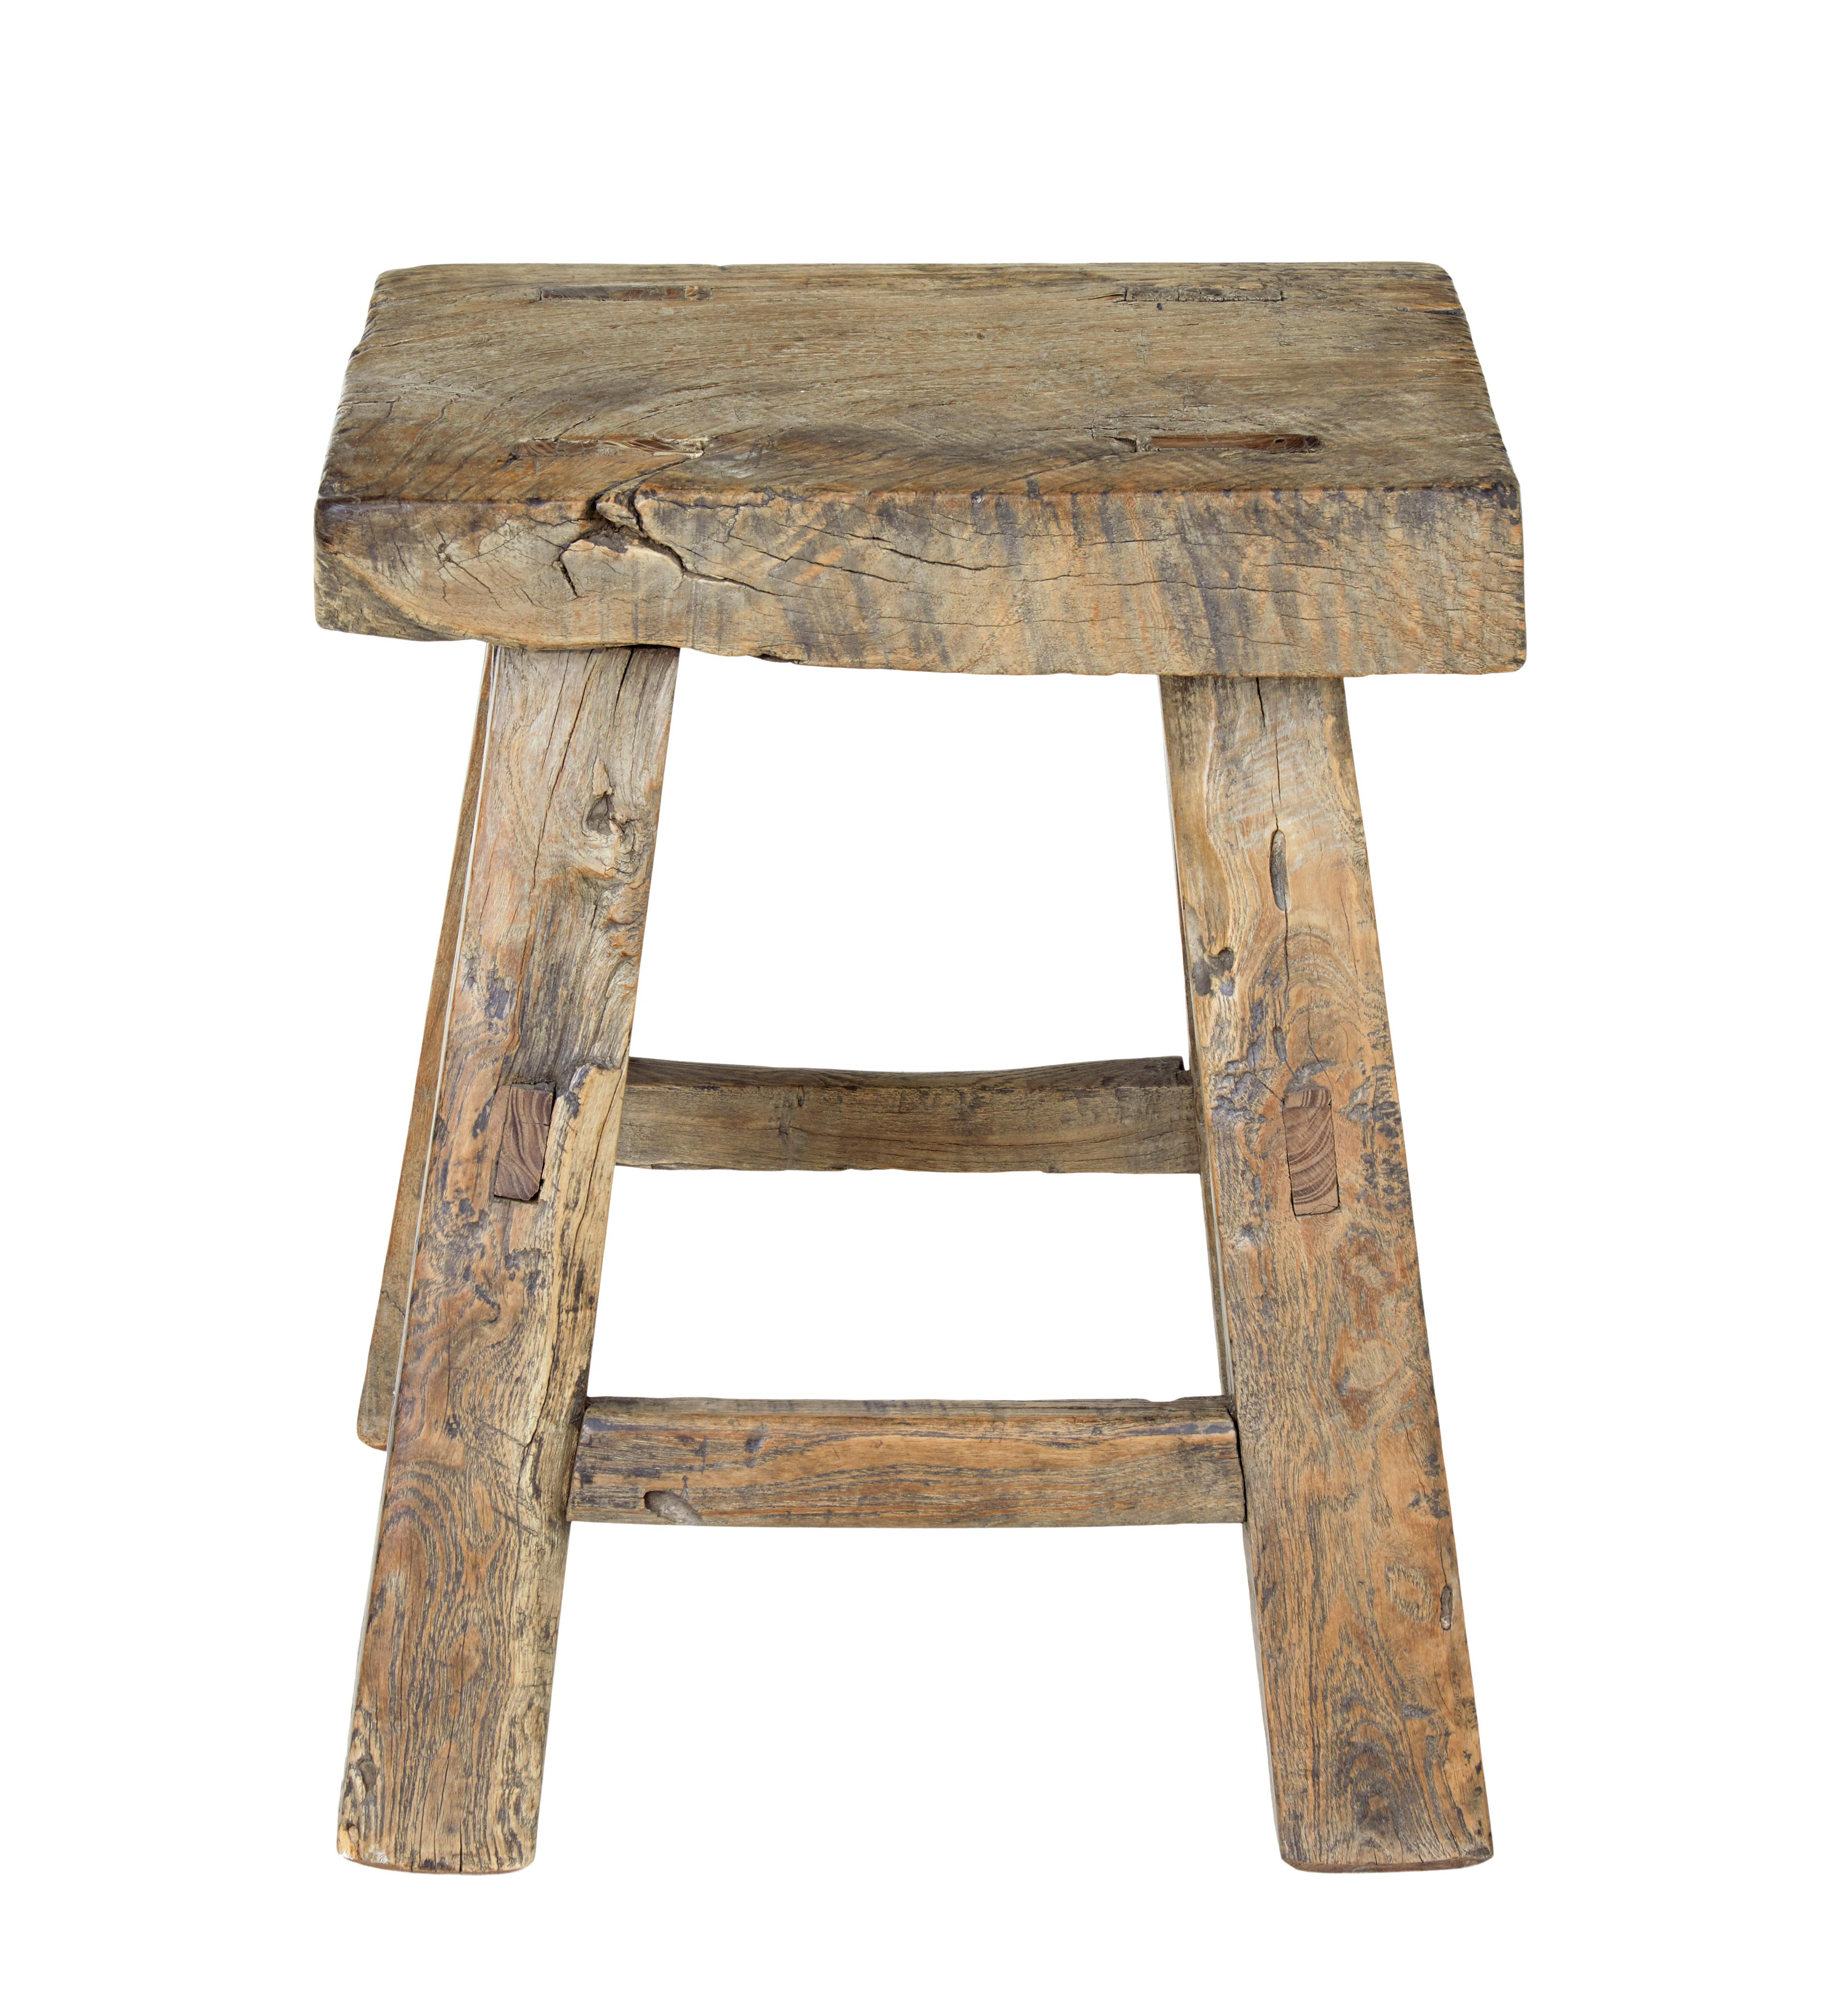 Rustic traditional Chinese elm stool circa 1890.

Made using naive mortise and tenon joints, provide great character for this stool.  Expected age splits and surface marks, structurally sound.

Ideal for use as a stool or as a side table.

Heavy